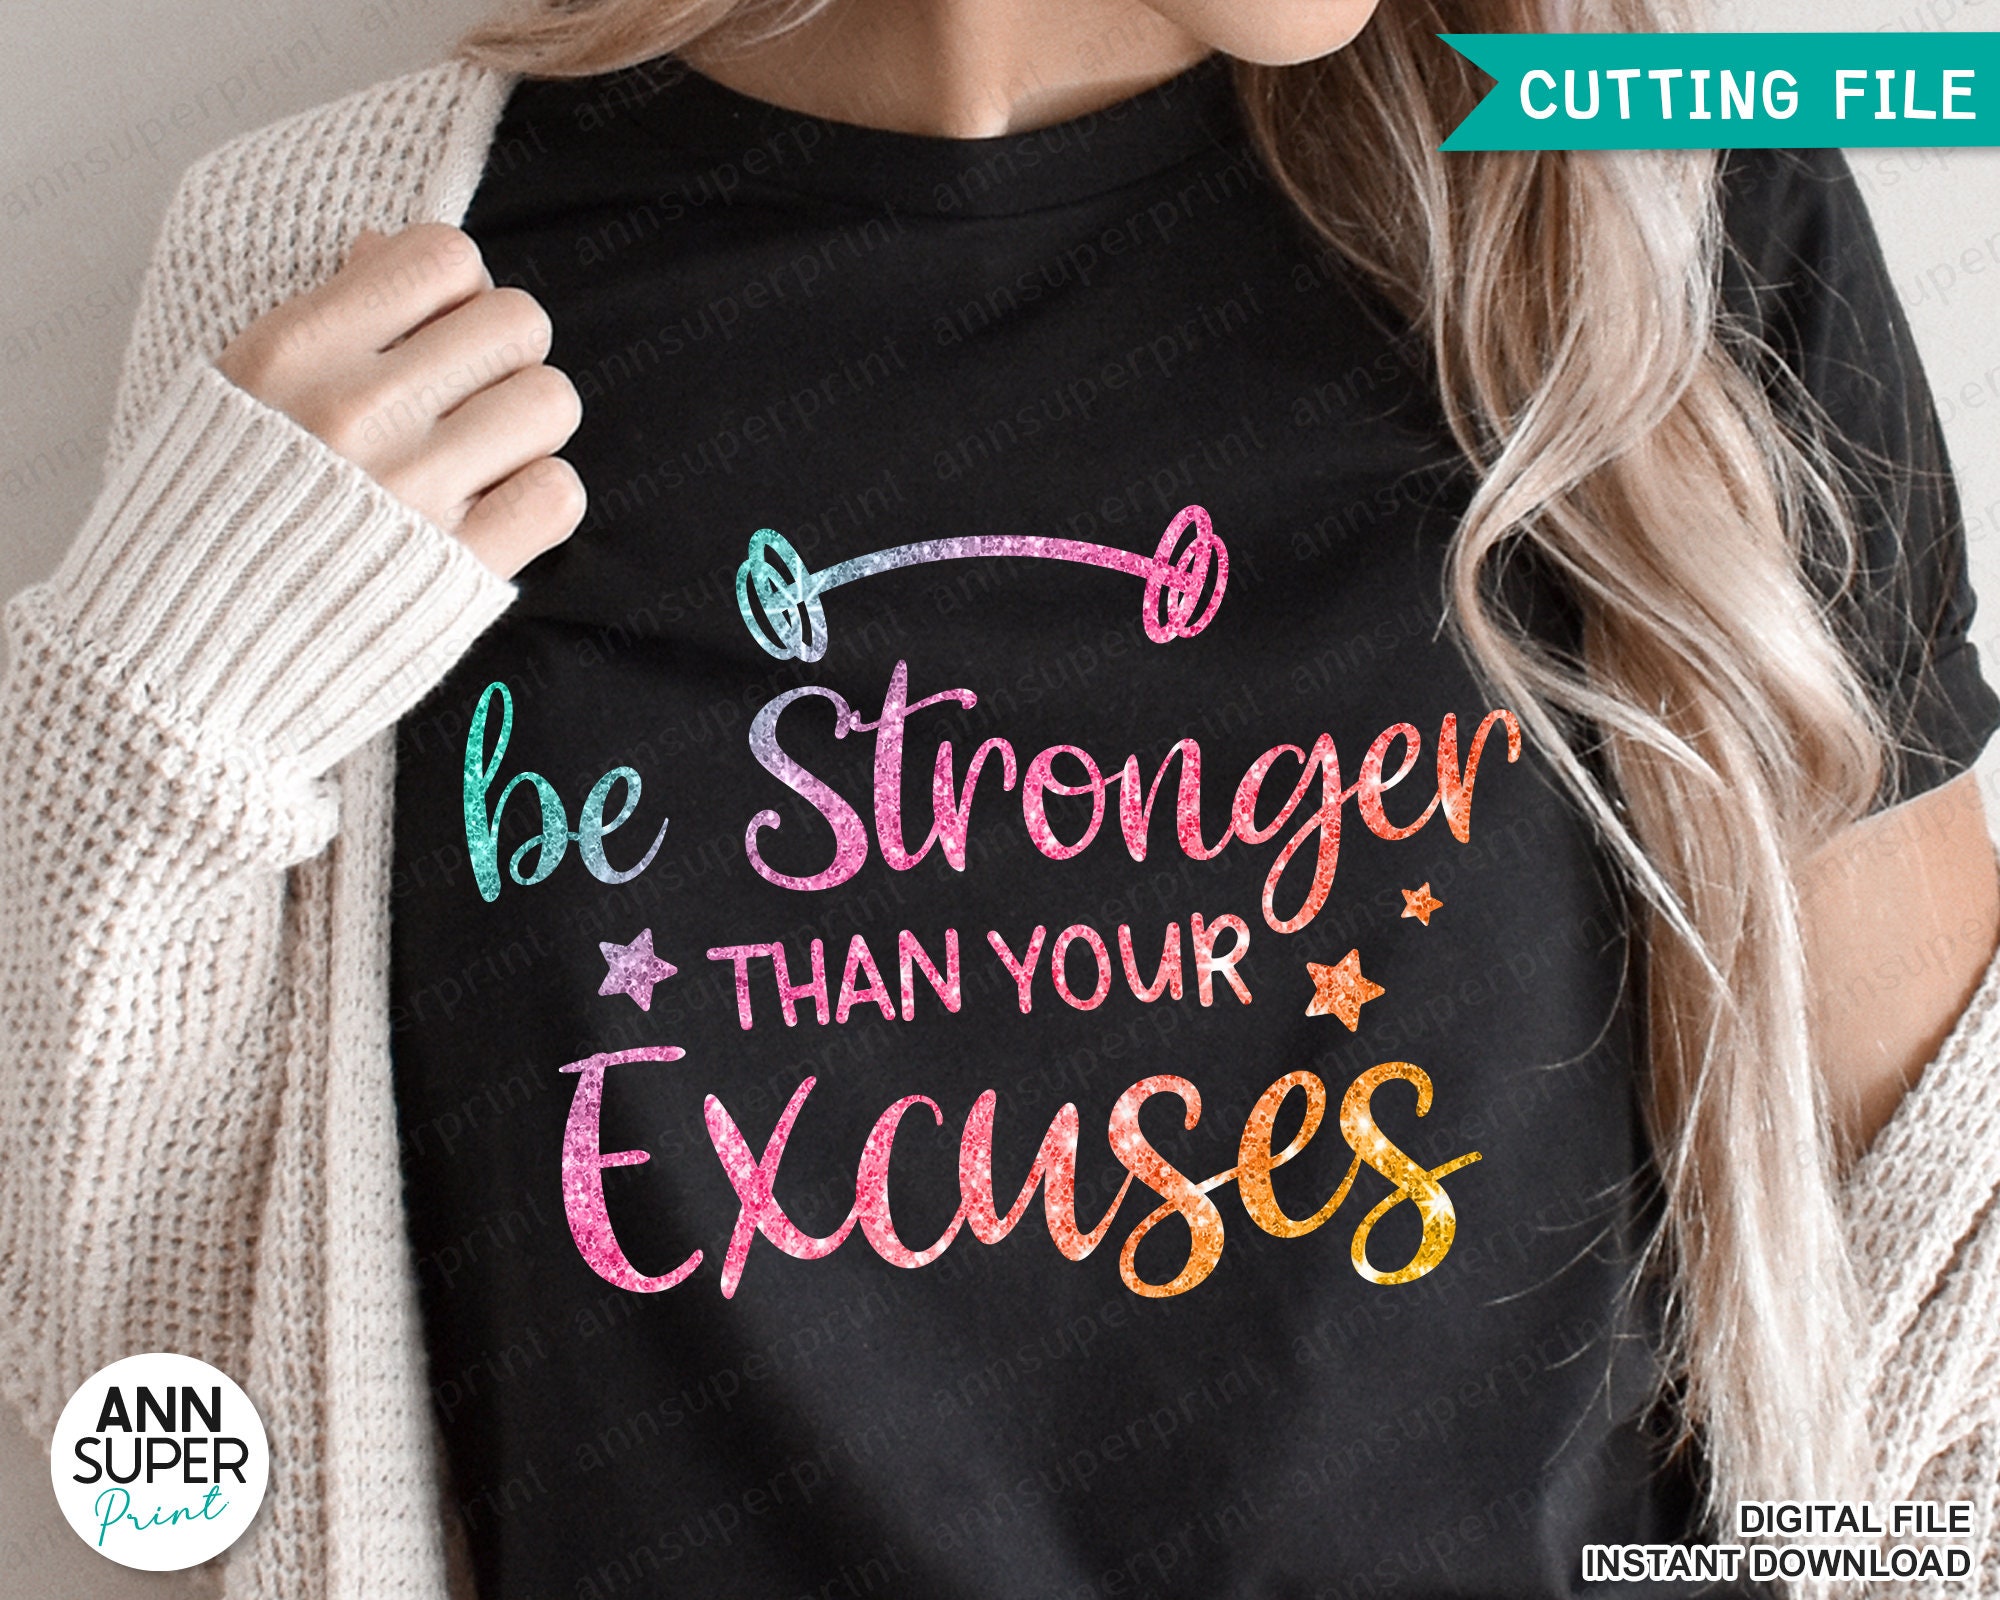 Inspirational Workout Shirts Be Stronger Than Your Excuses Motivational  Fitness Apparel Cute Gym Shirt Fit Moms Inspiration Lifting Tank Top -   Canada